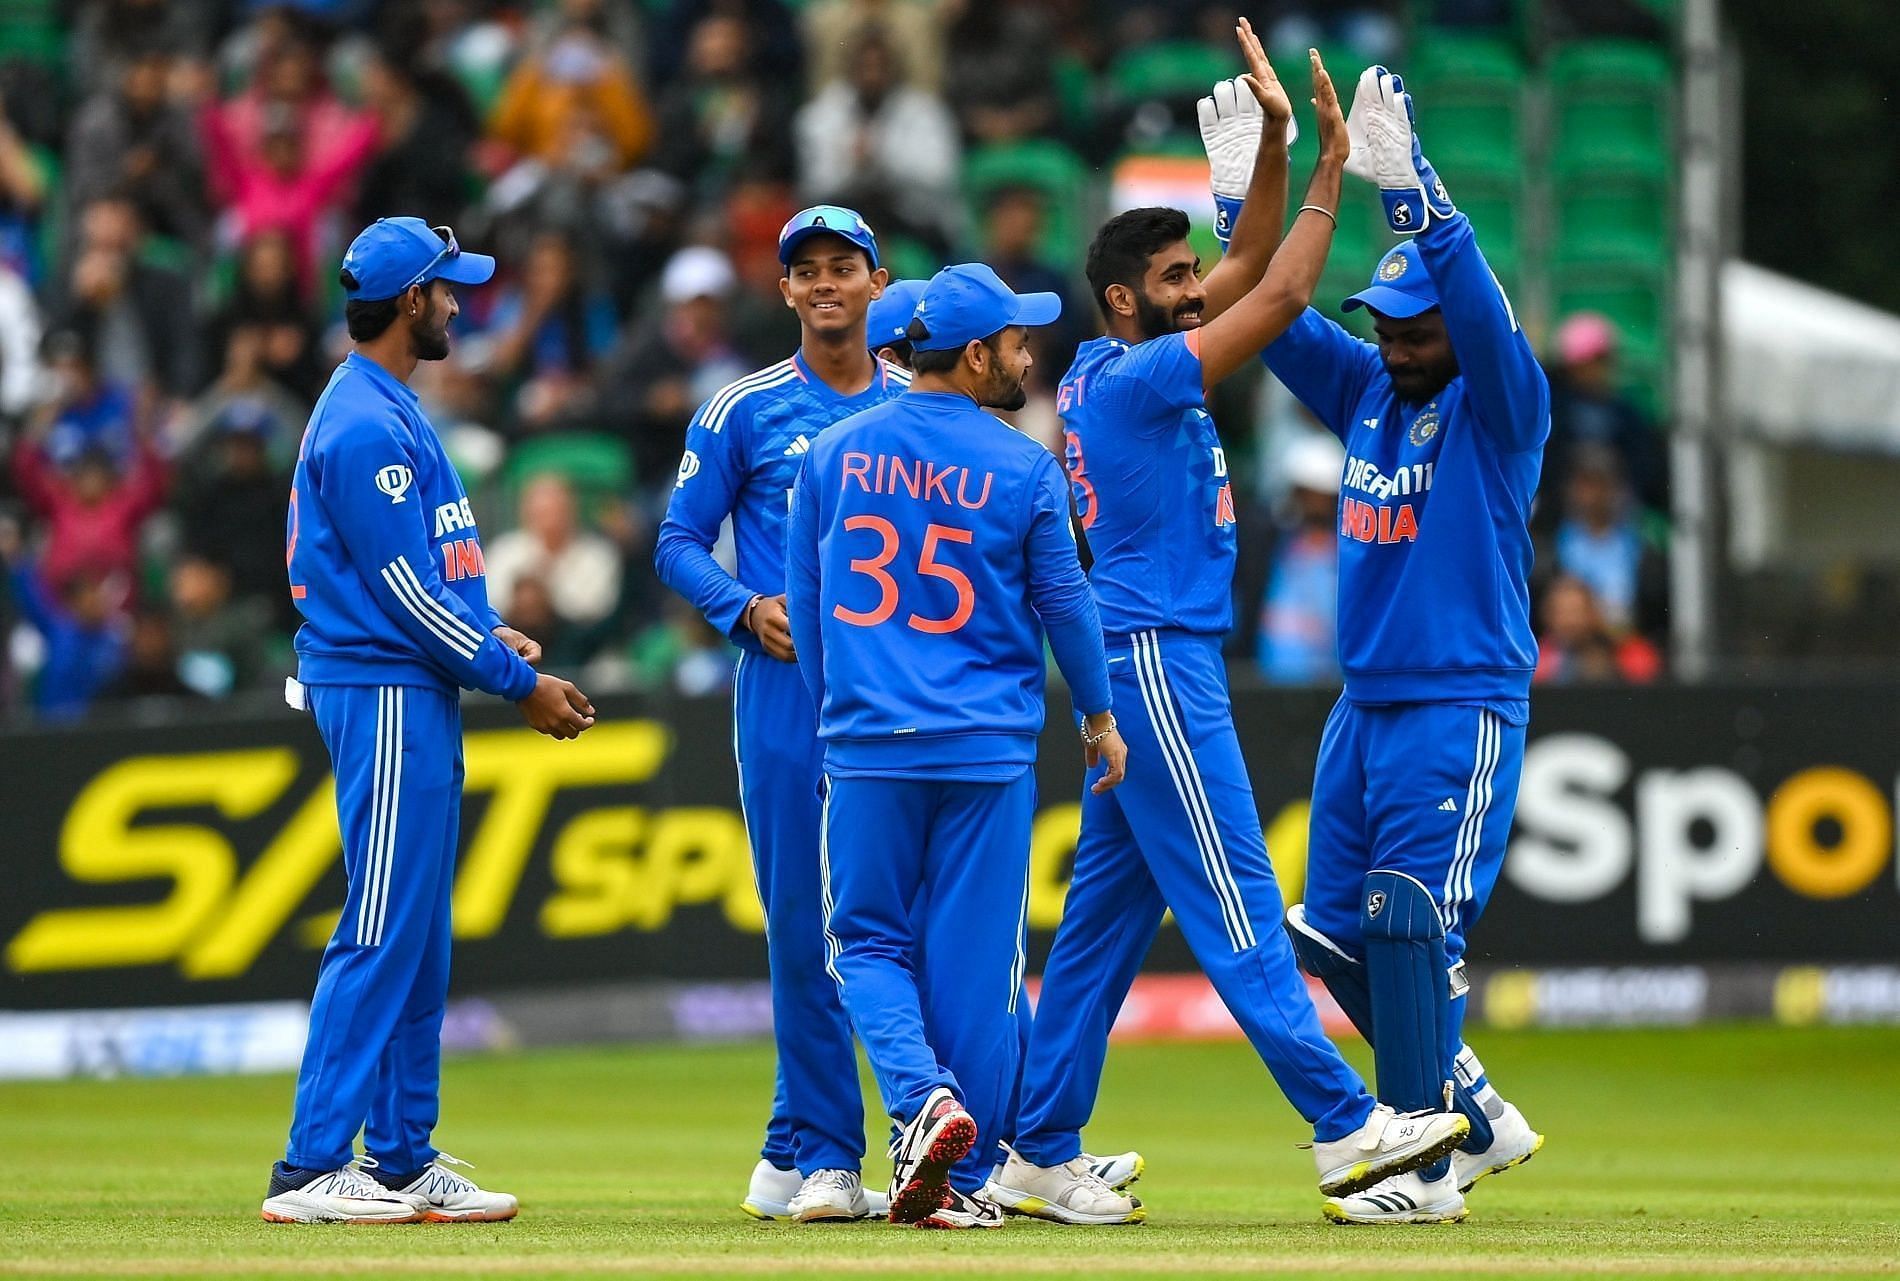 Jasprit Bumrah celebrates a wicket with teammates. (Pic: BCCI)